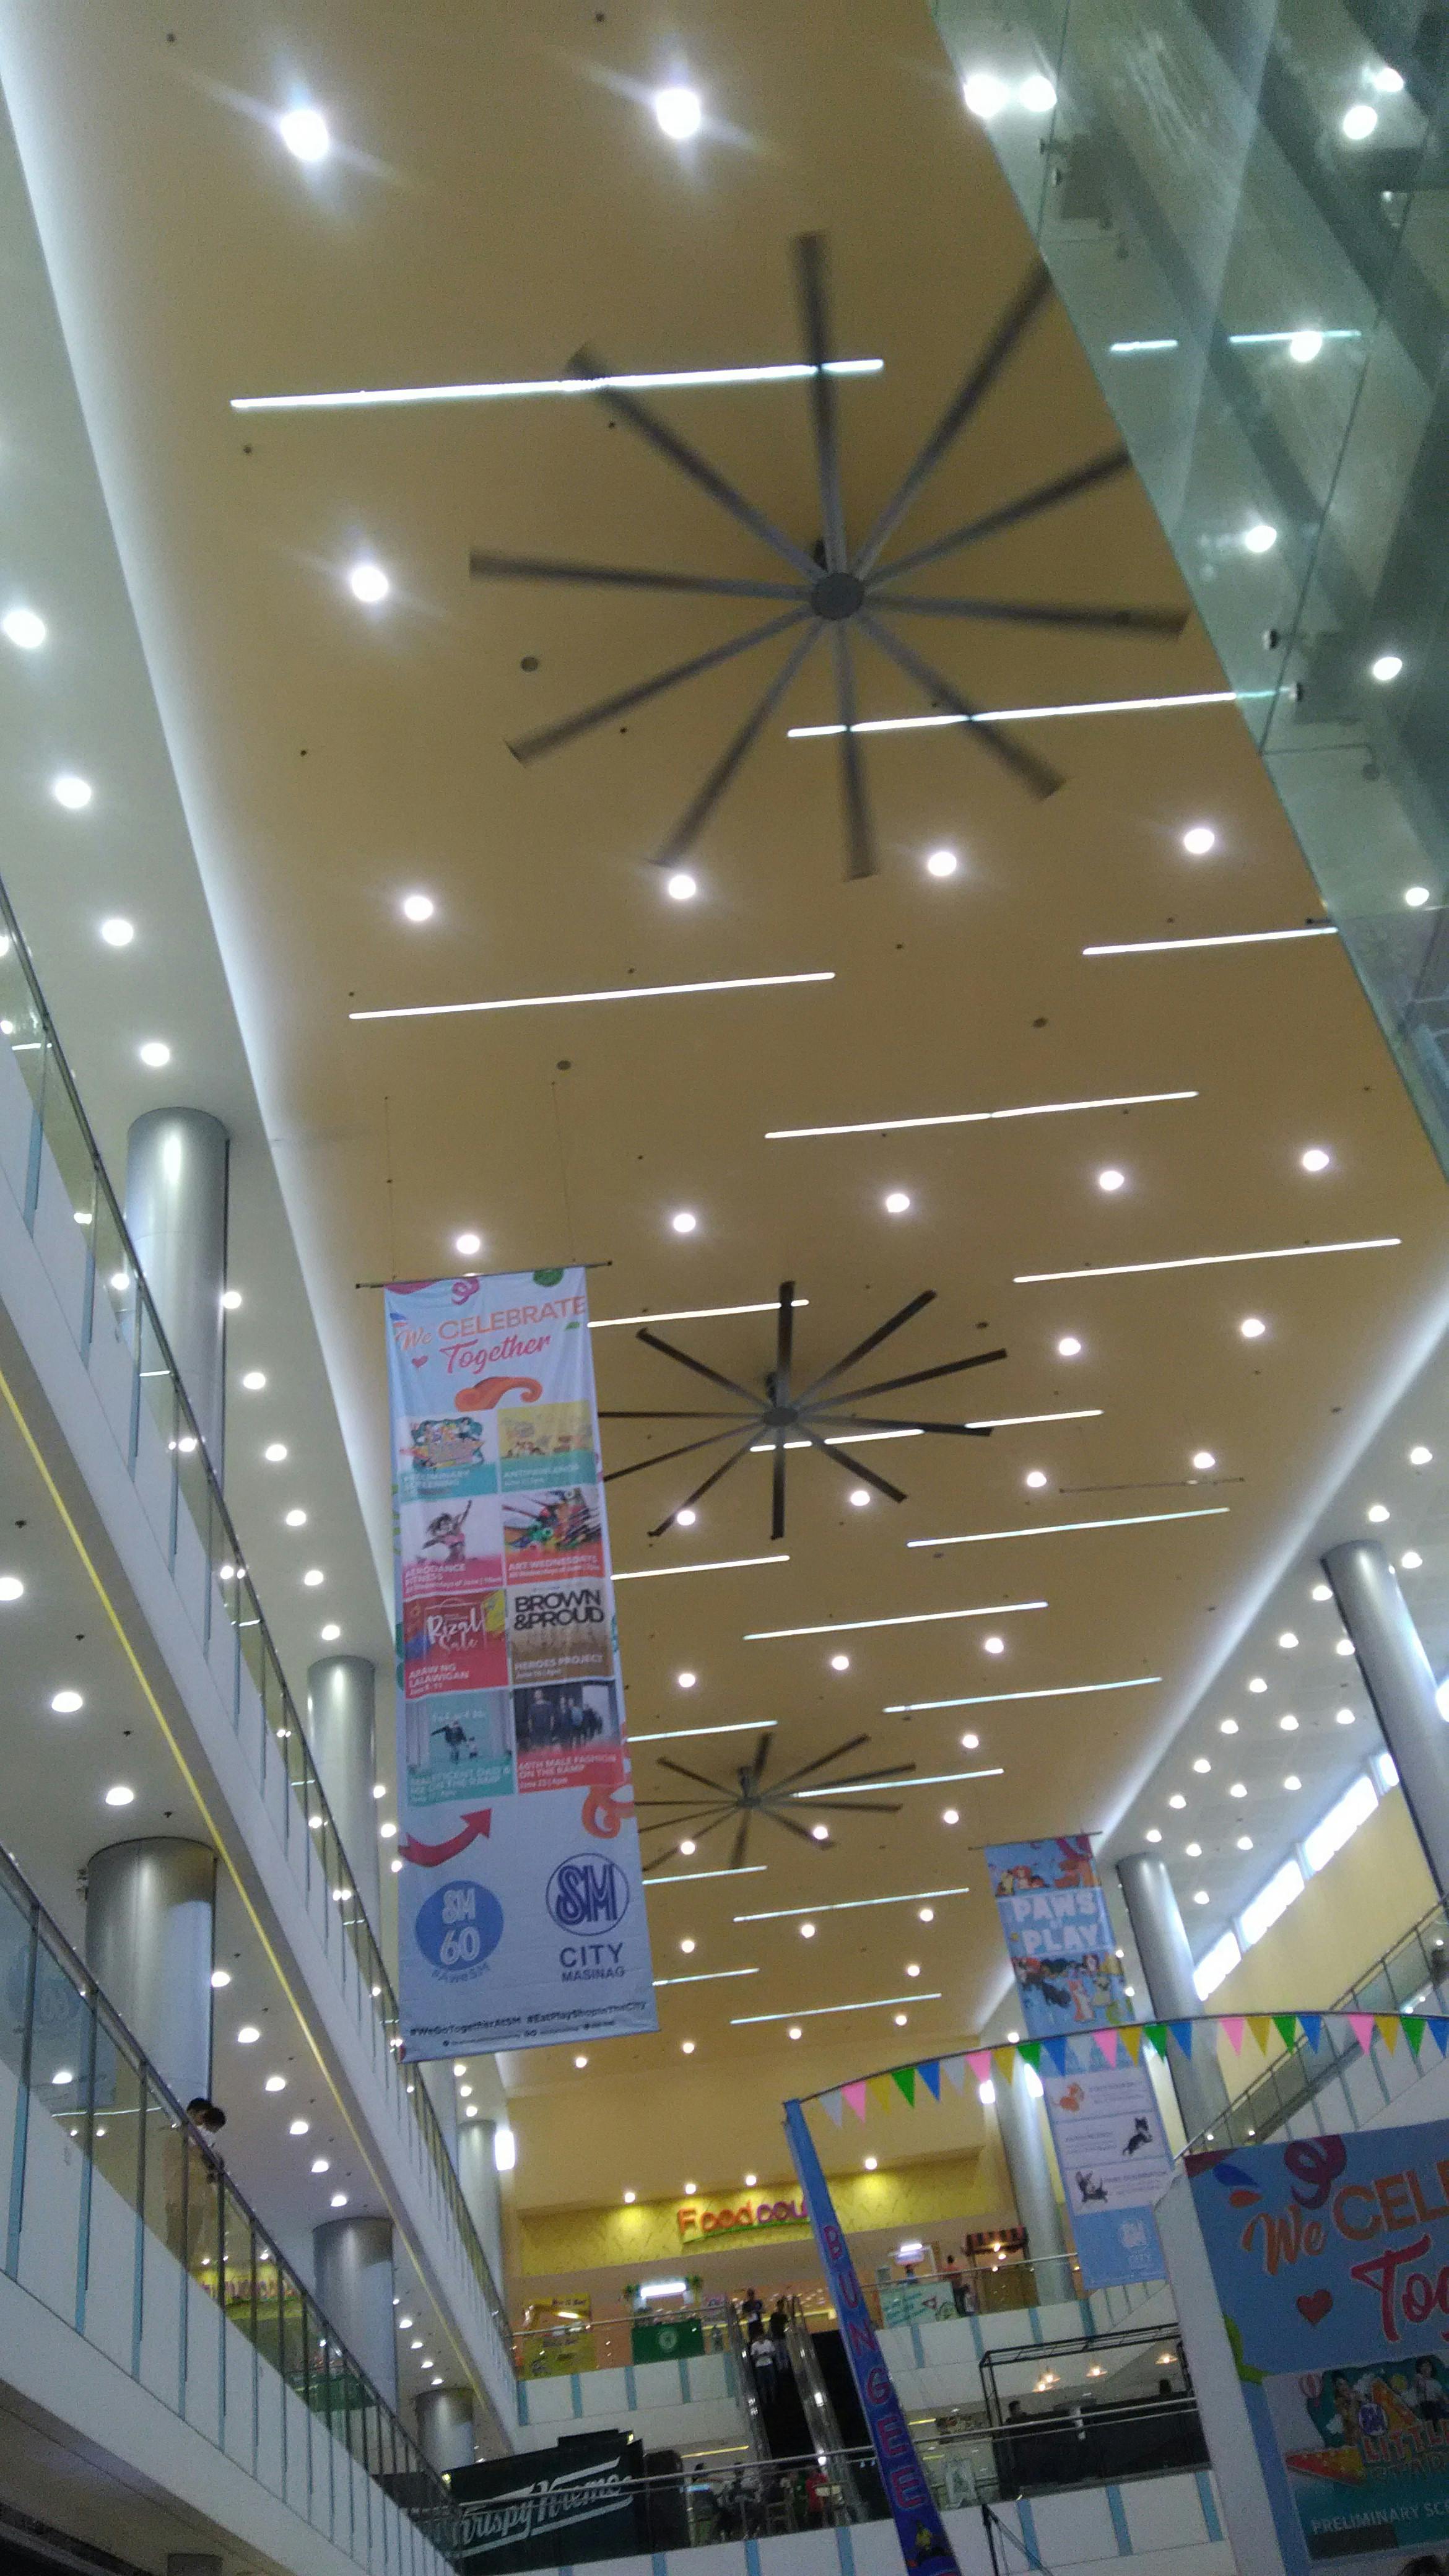 Free stock photo of ceiling fan, Shopping Mall